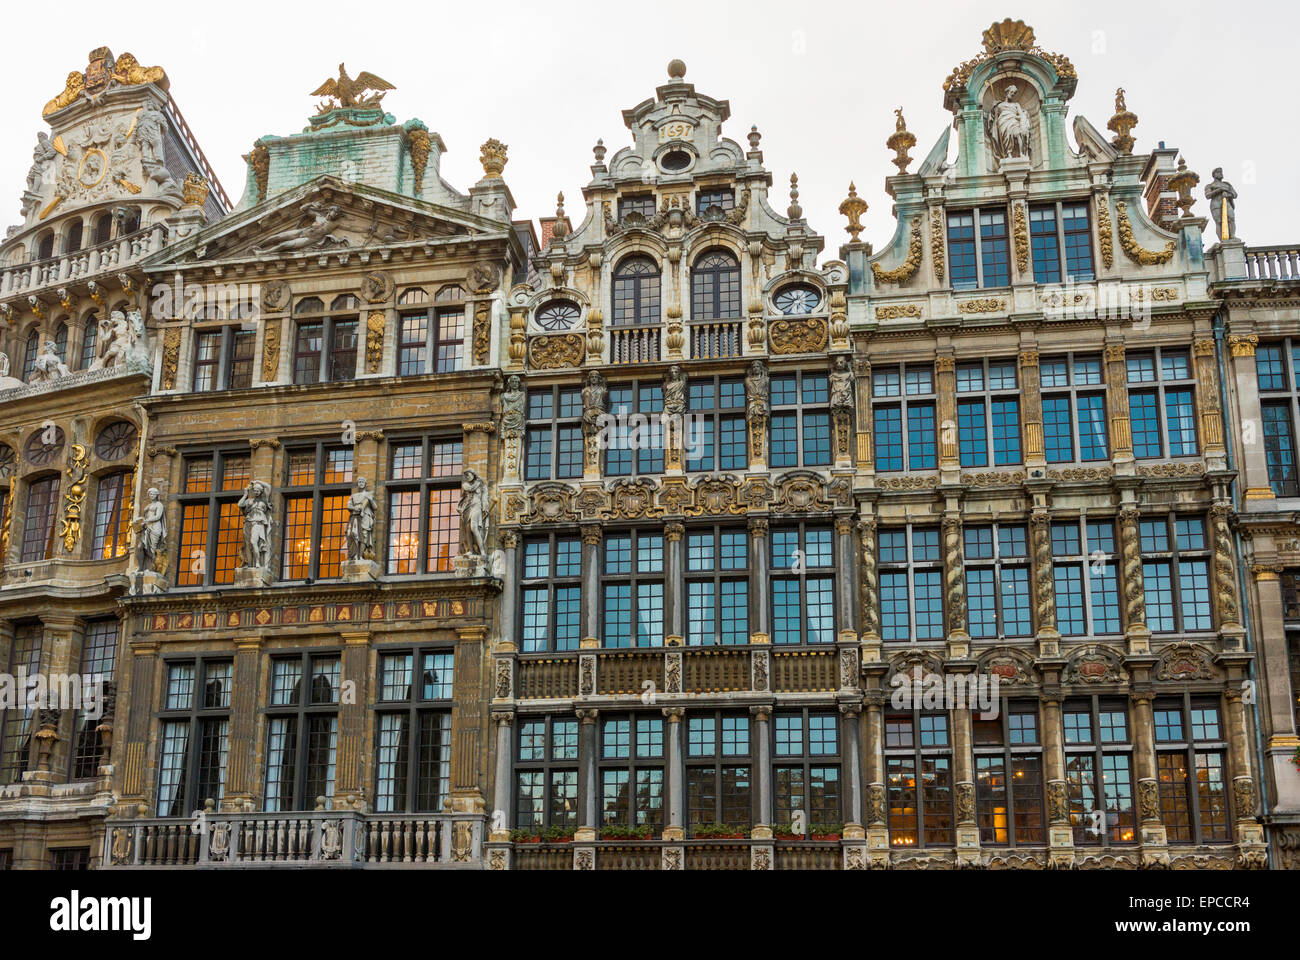 Ornate, 17th century Flemish Renaissance buildings on the north side of Grand Place, Brussels, Belgium, seen in evening light. Stock Photo